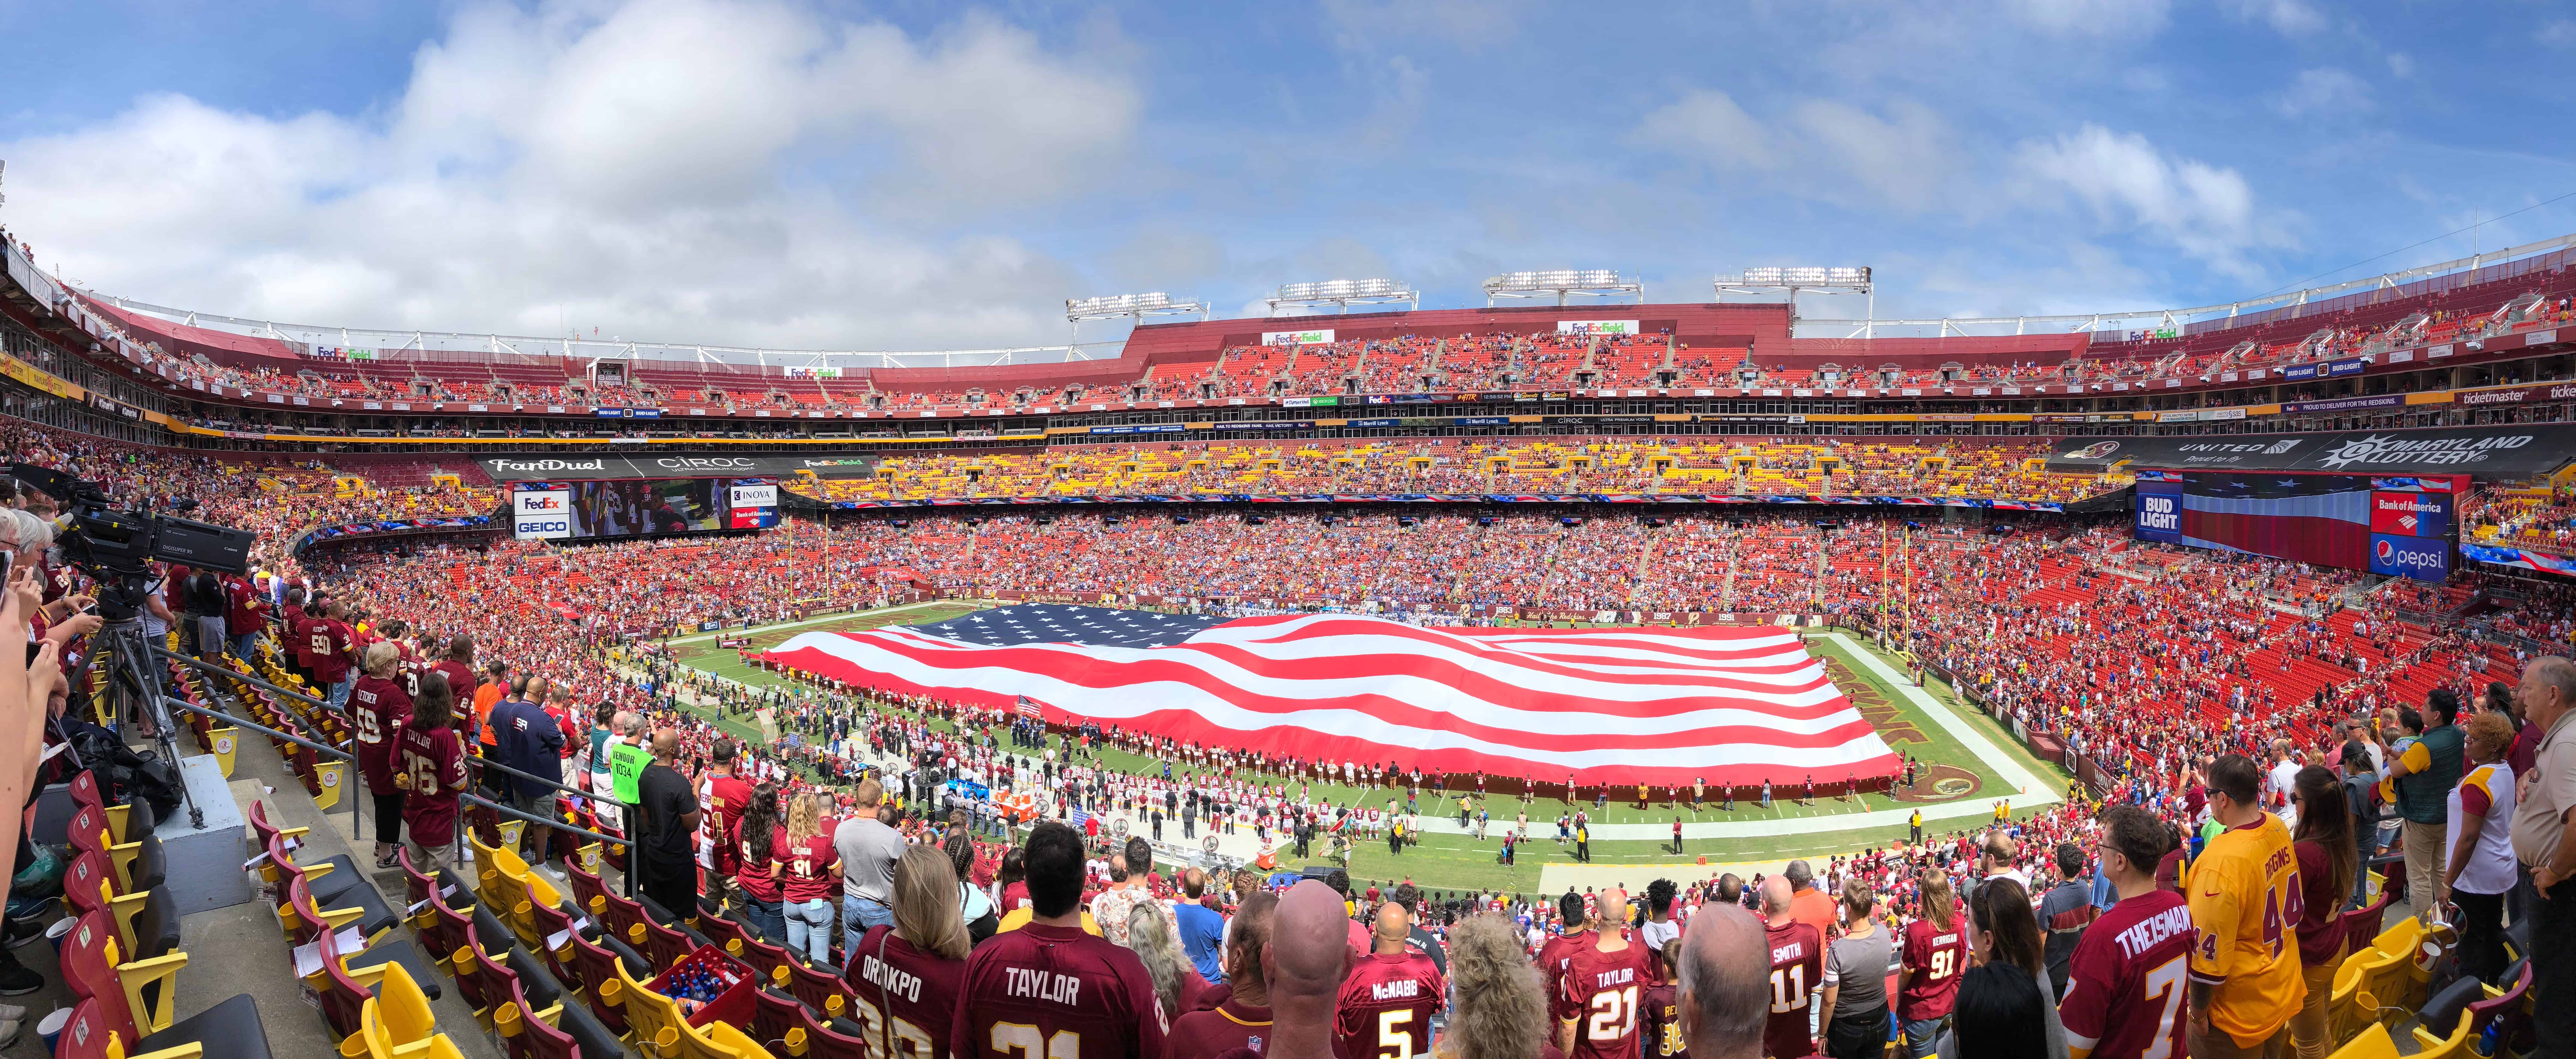 Giant American flag outstretched on NFL football field